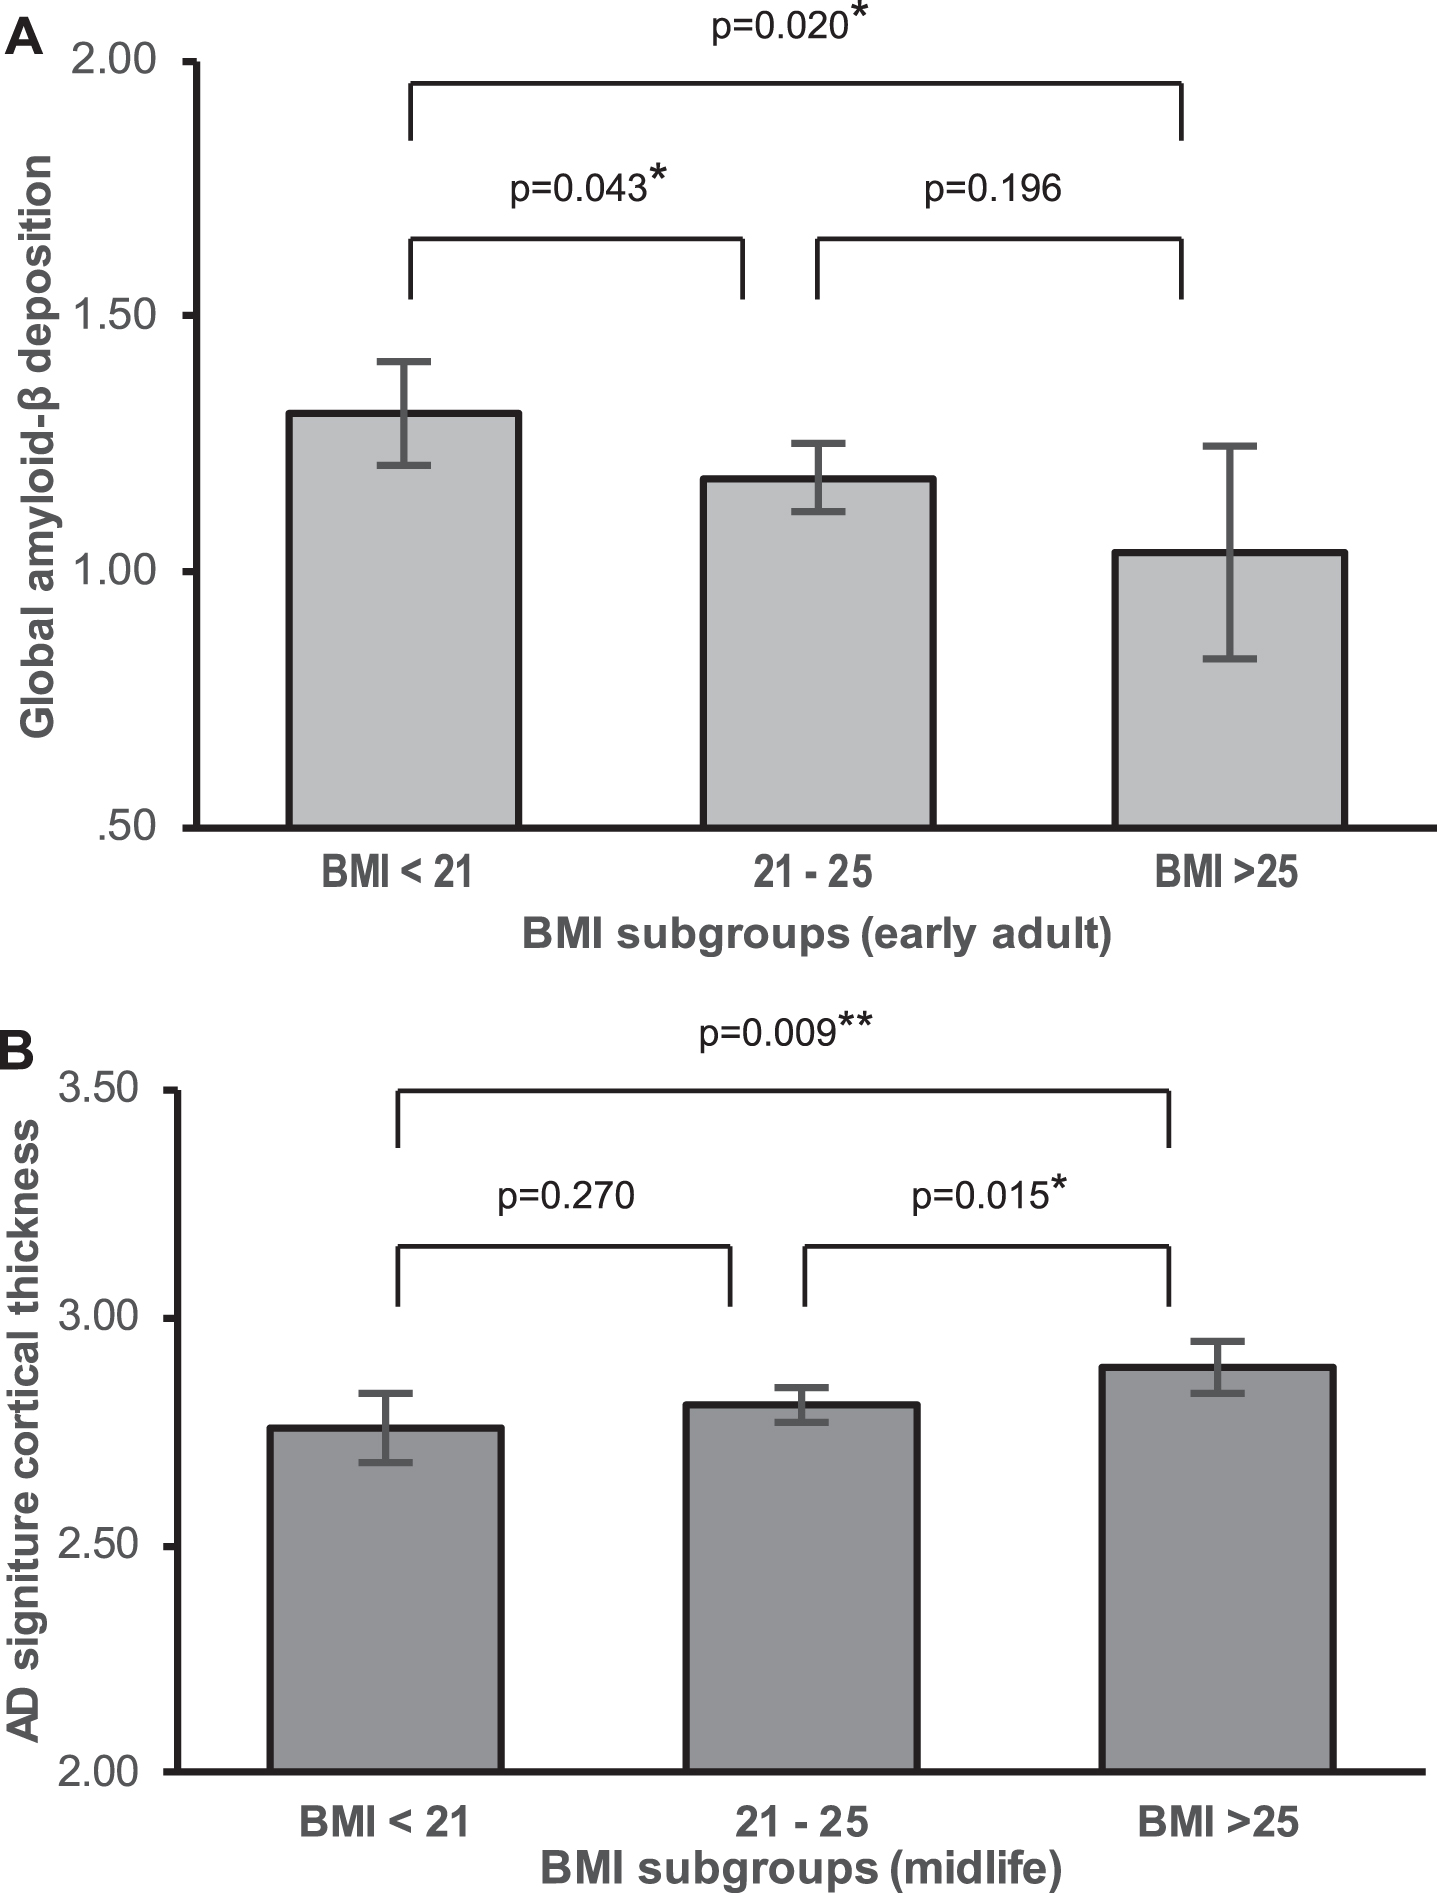 Differences in AD biomarker level by BMI stratum. Differences in adjusted means of global Aβ deposition between early adulthood BMI strata (A), and Adjusted means of AD signature region cortical thickness between midlife BMI strata in males (B).